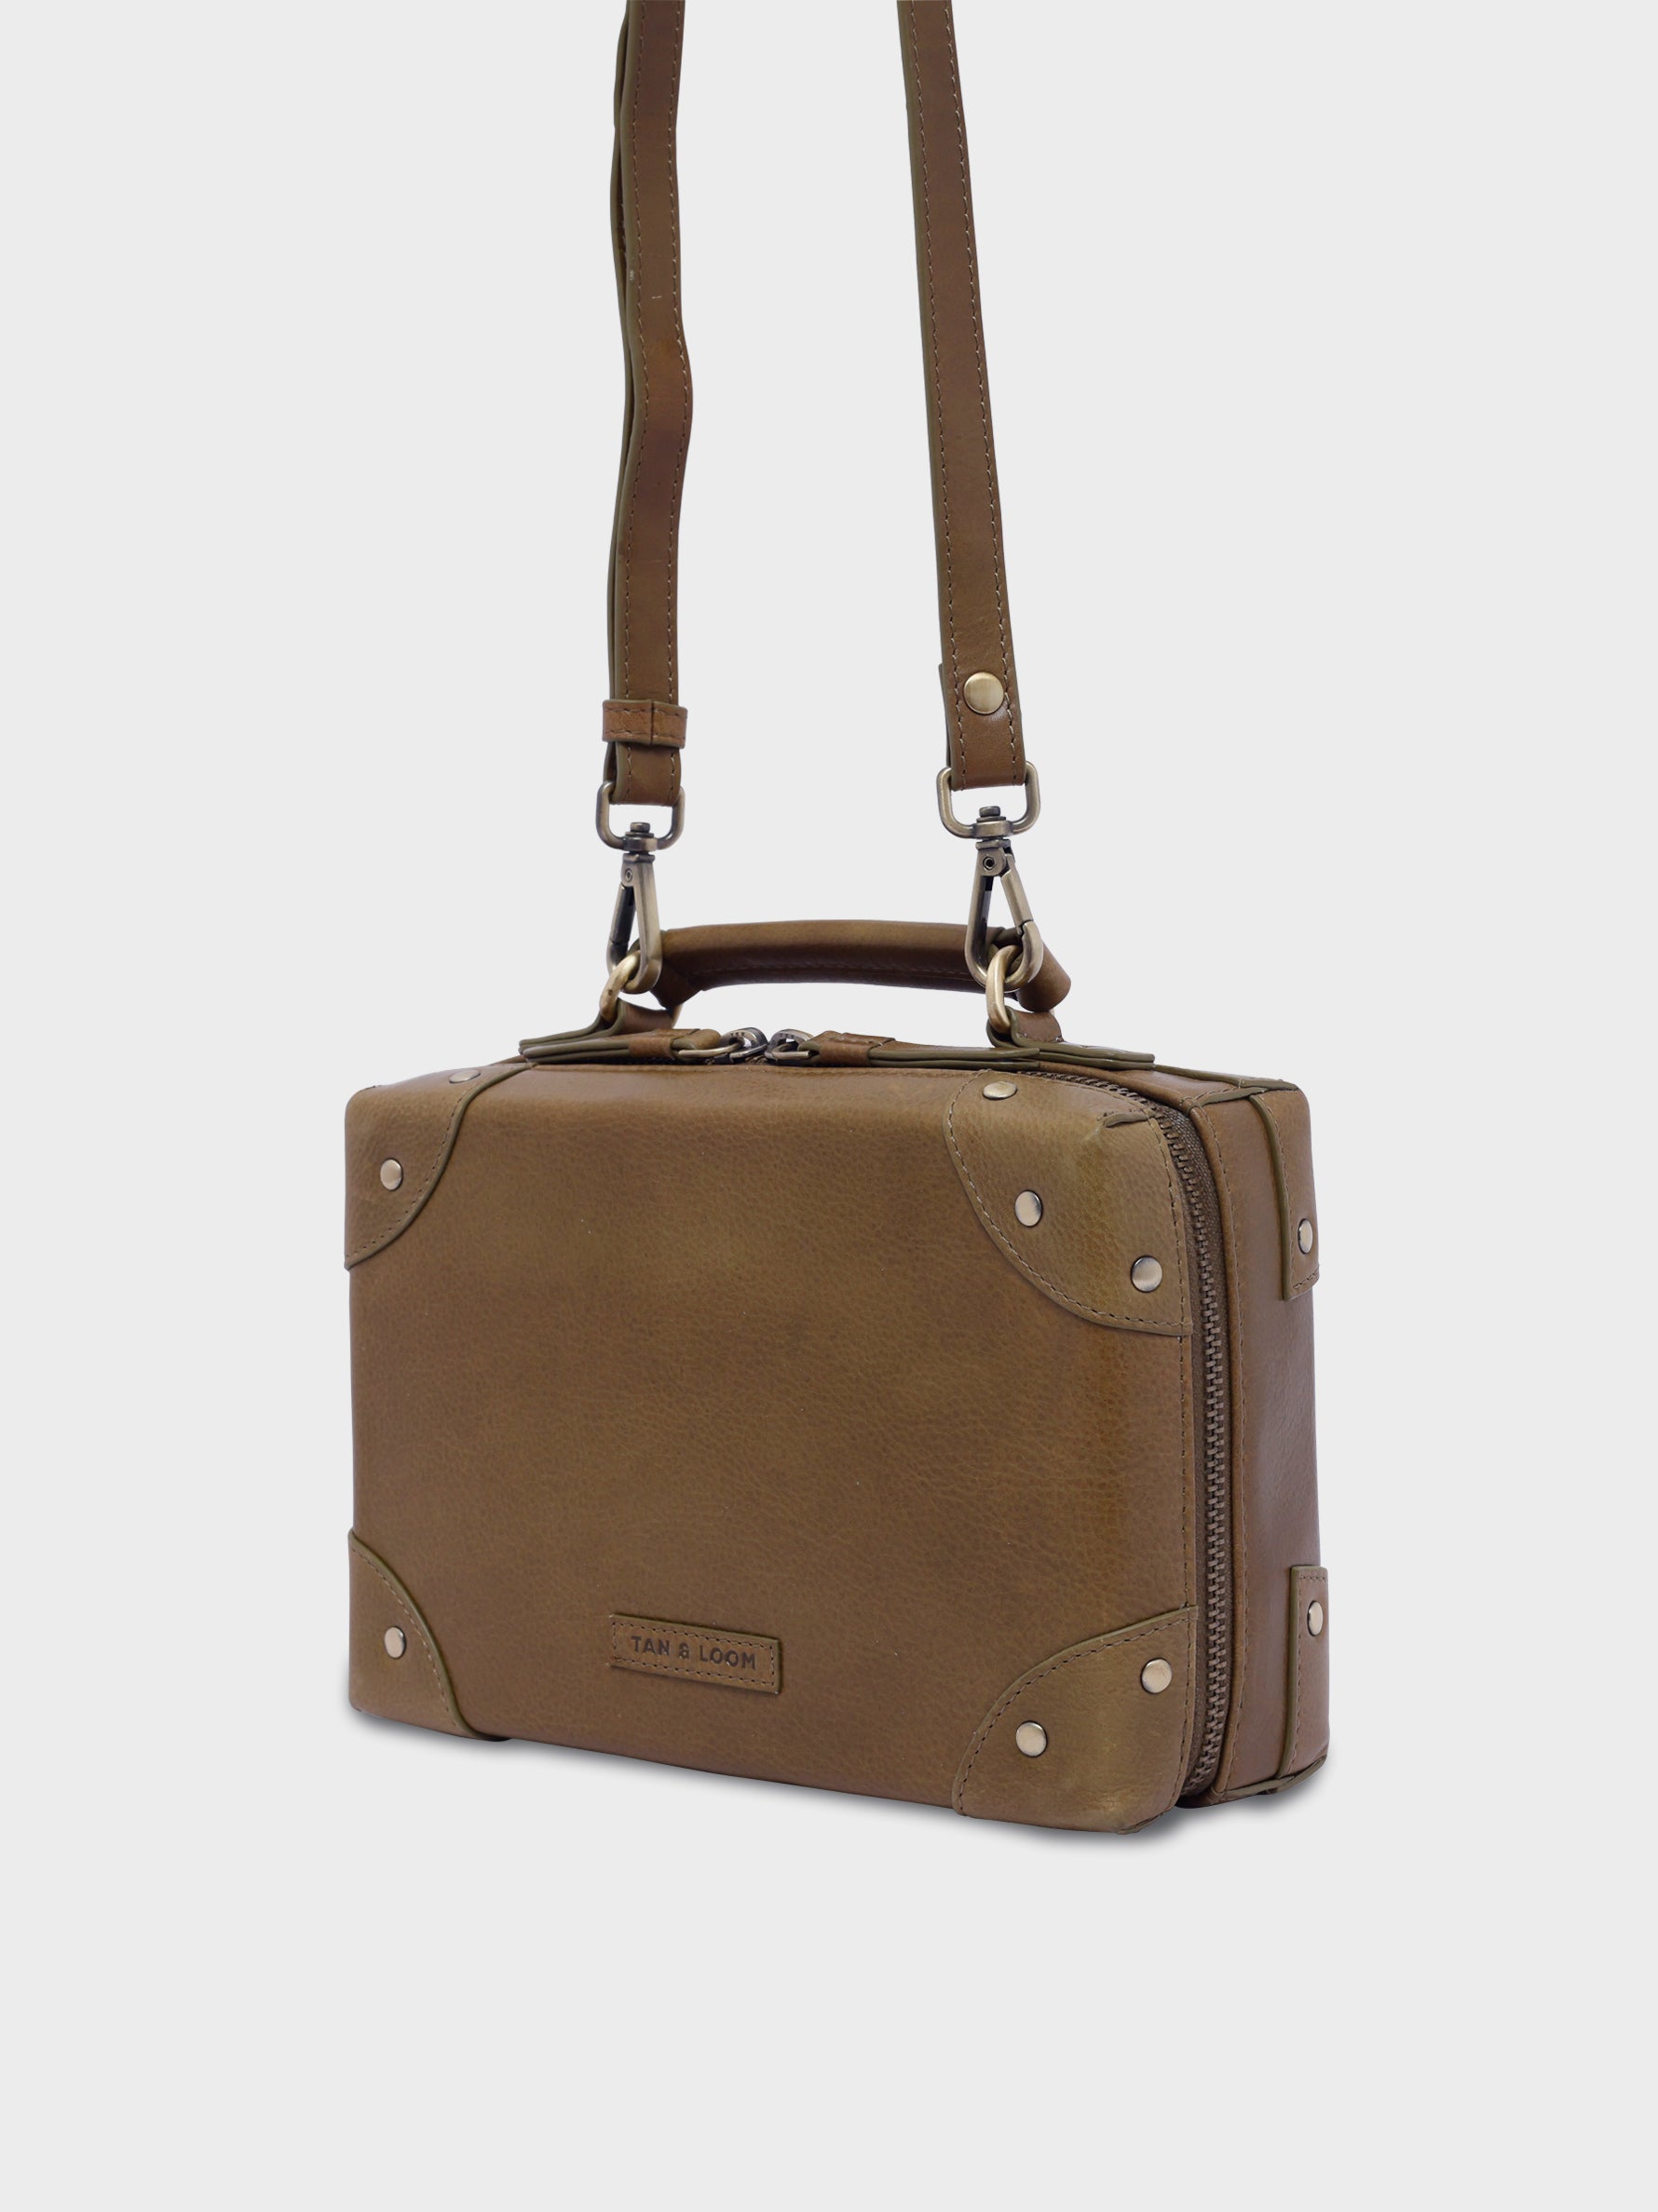 Handcrafted Genuine Vegetable Tanned Leather Traveller's Trunk Mini Sling Olive Green for Women Tan & Loom